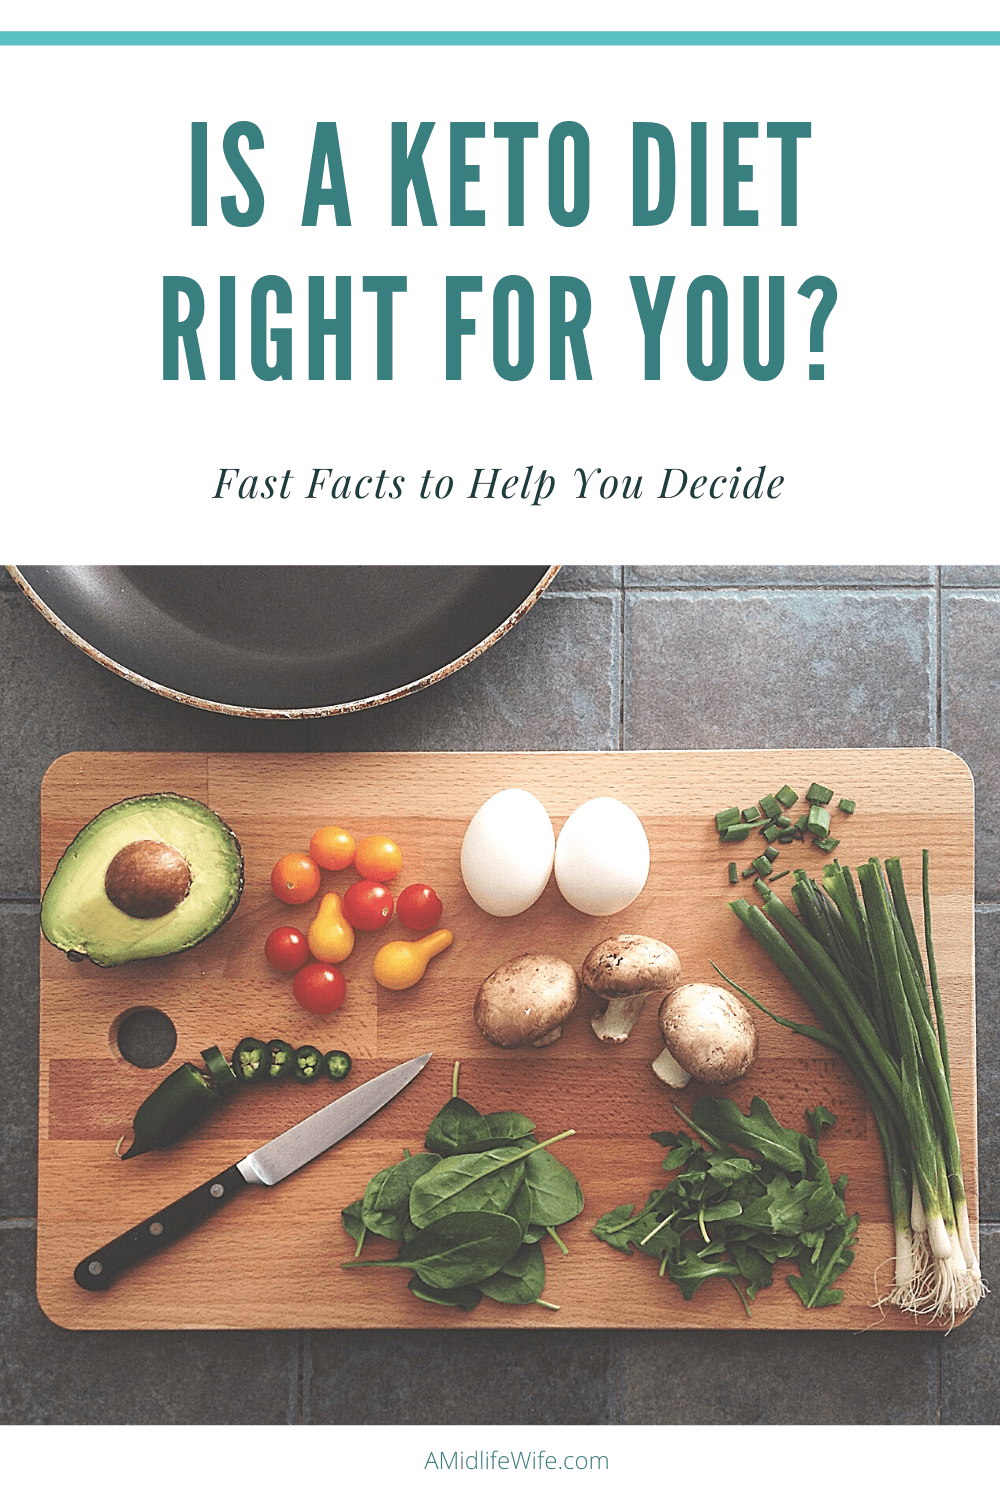 Is A Keto Diet Right for You? Fast Facts to Help You Decide - A Midlife